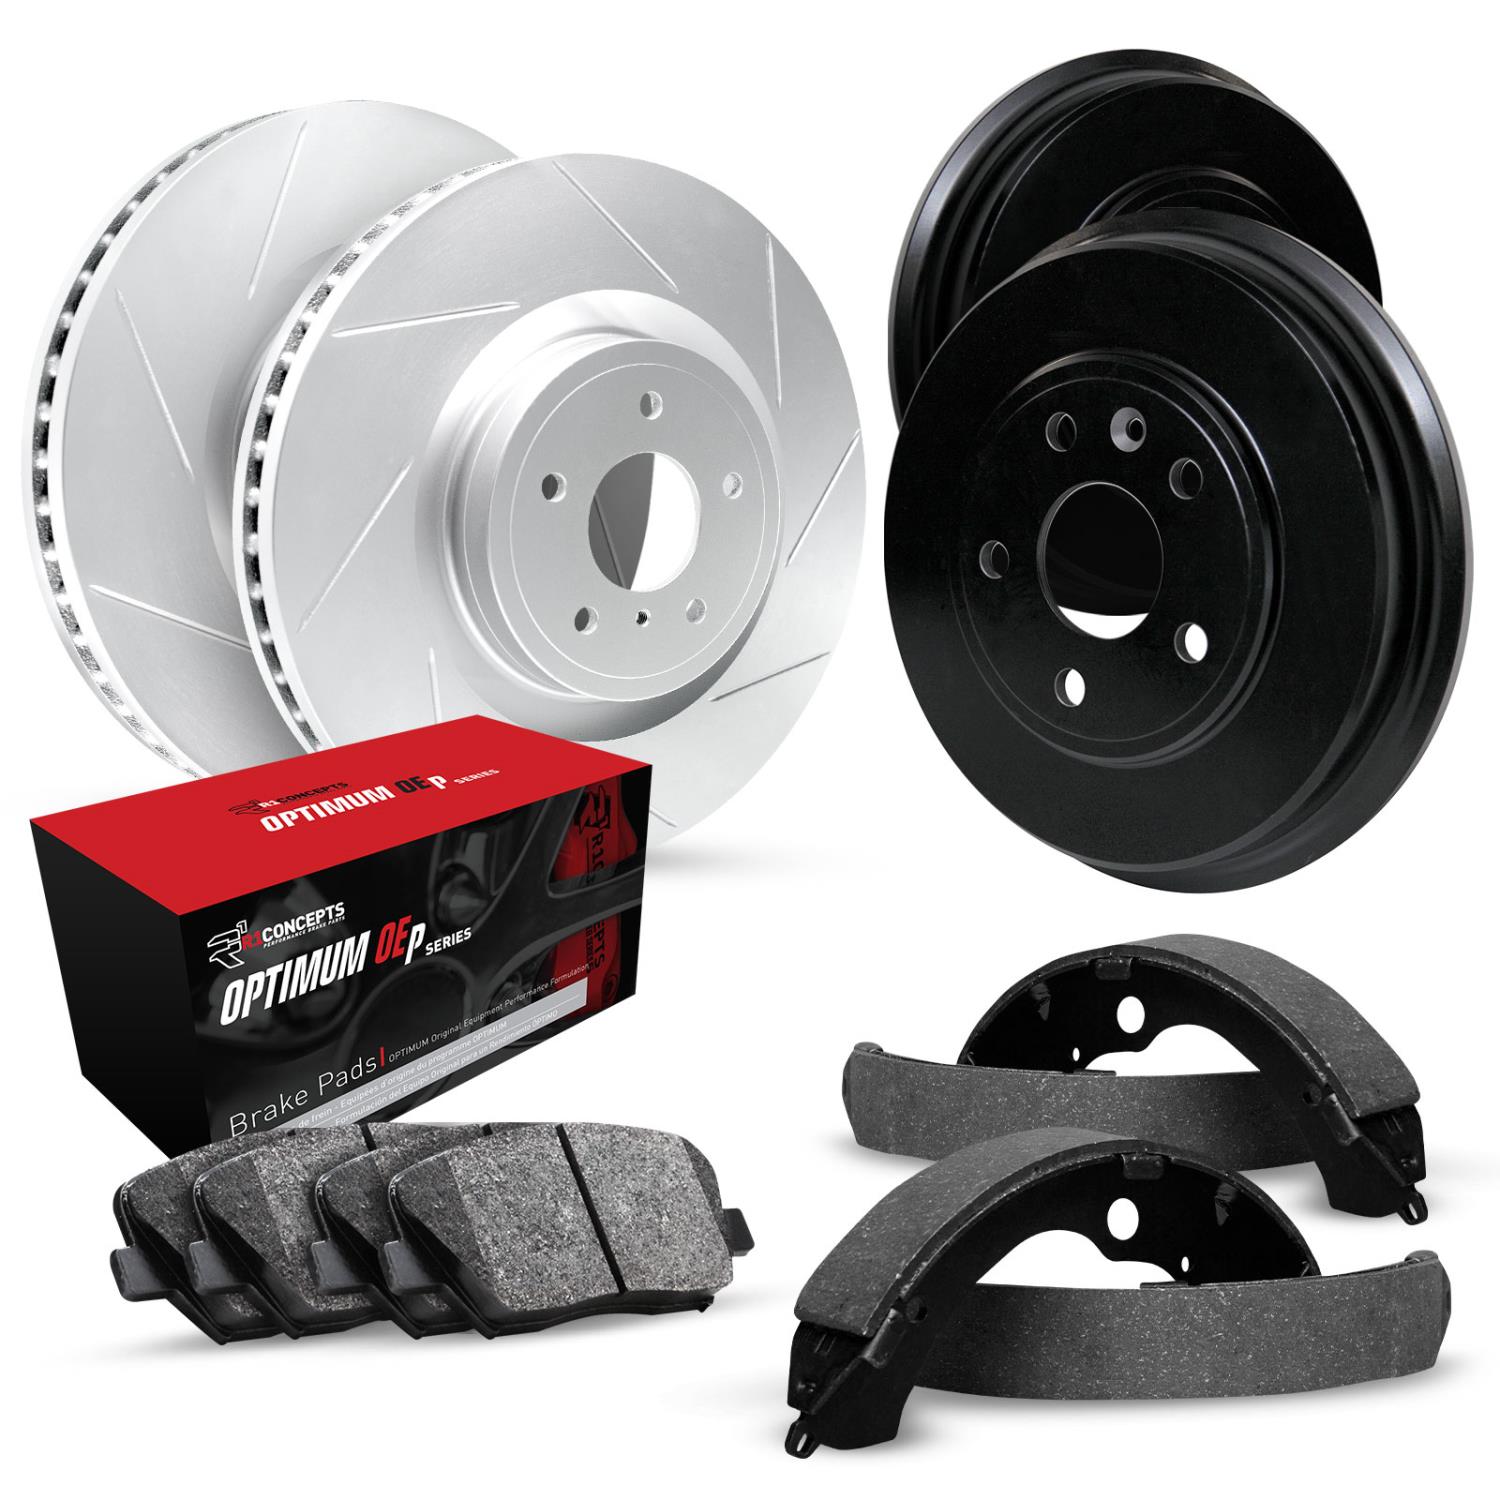 GEO-Carbon Slotted Brake Rotor & Drum Set w/Optimum OE Pads & Shoes, 1966-1966 Ford/Lincoln/Mercury/Mazda